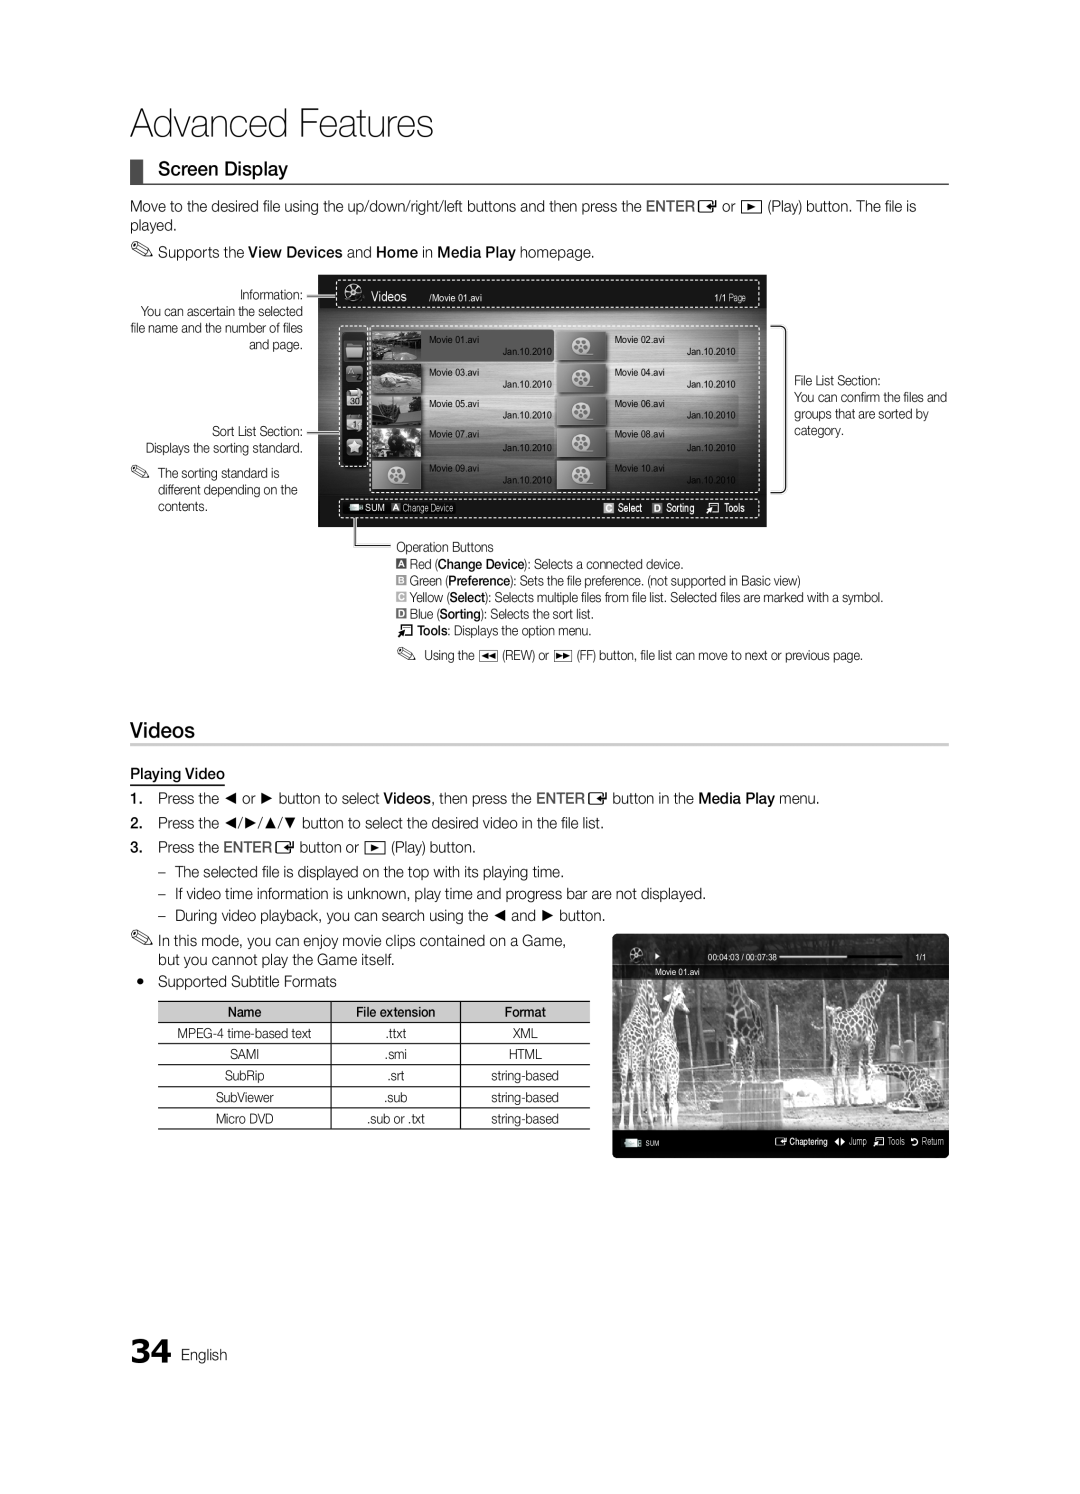 Samsung 6800 user manual Videos, Screen Display, Advanced Features 